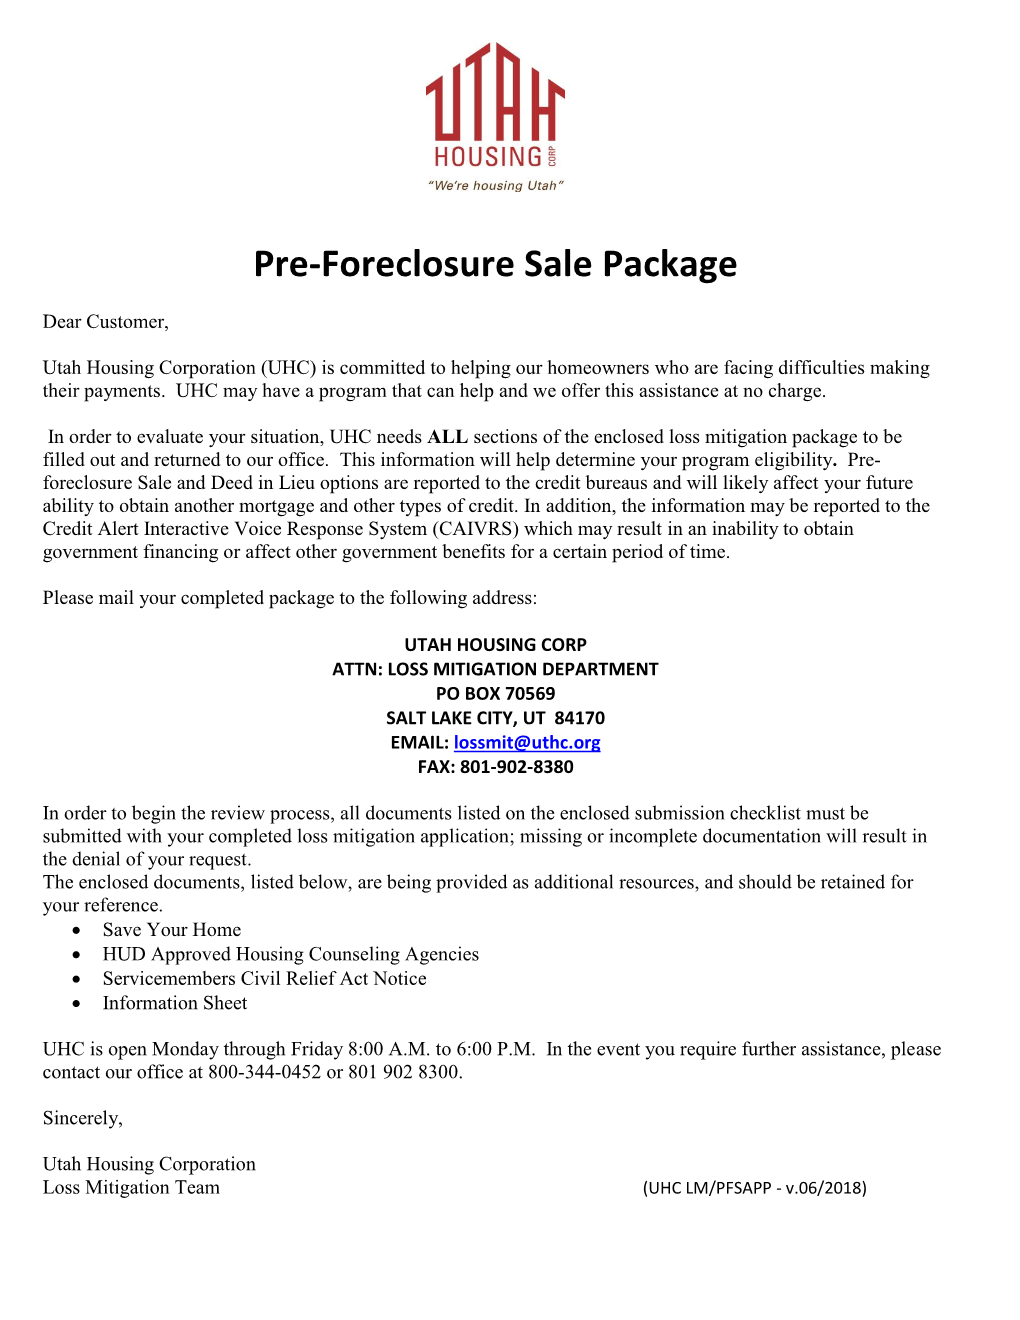 Pre-Foreclosure Sale Package